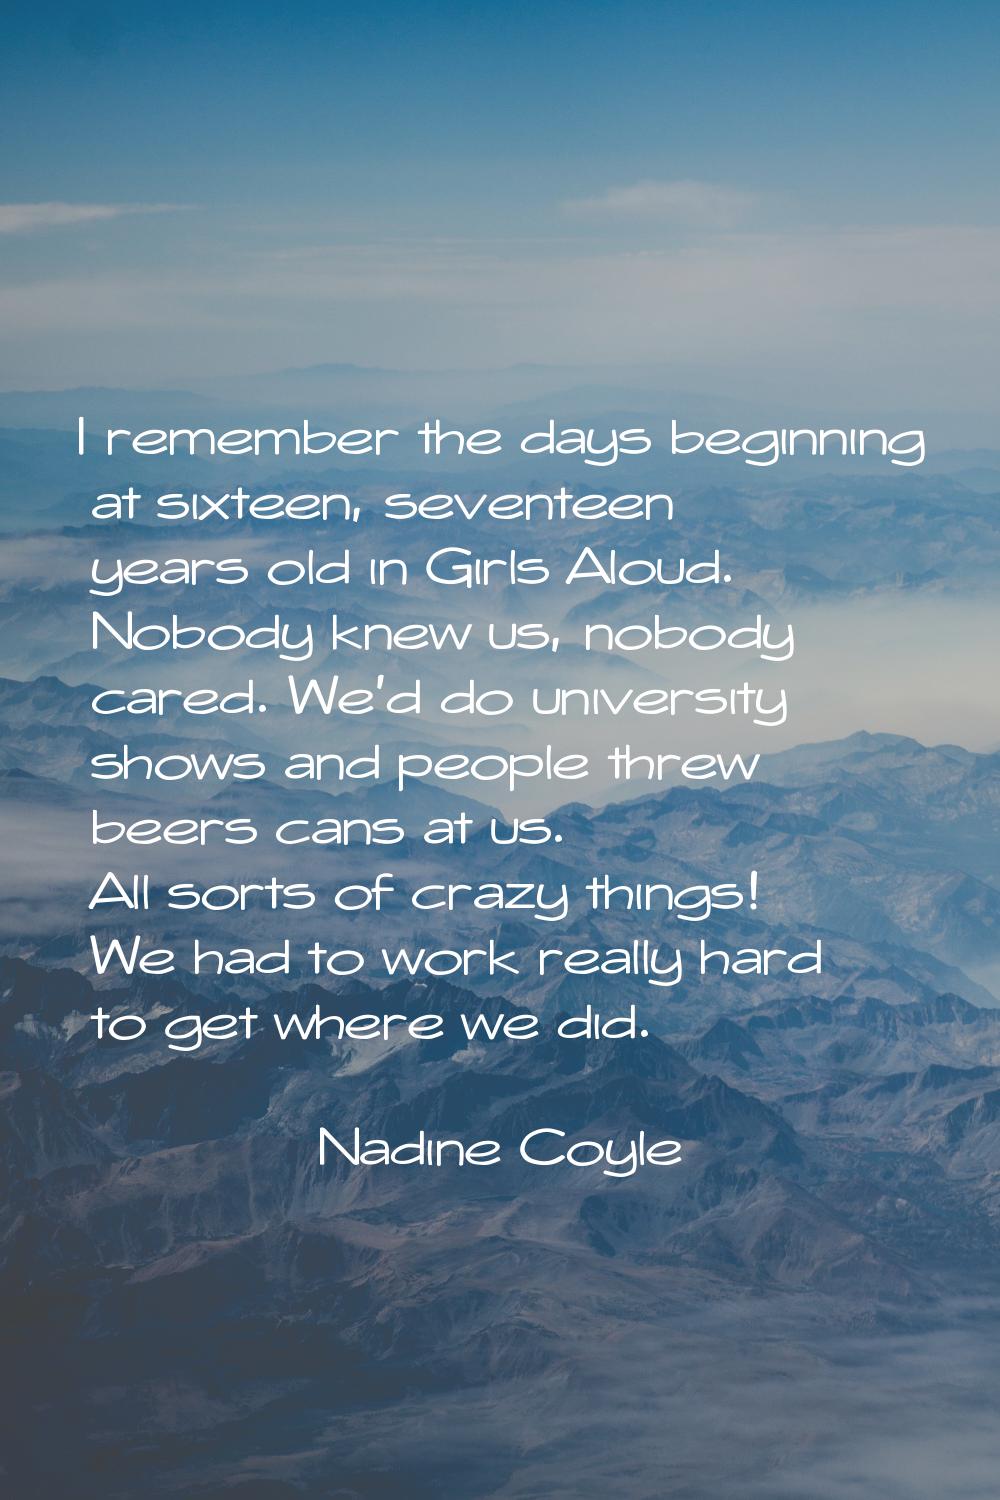 I remember the days beginning at sixteen, seventeen years old in Girls Aloud. Nobody knew us, nobod